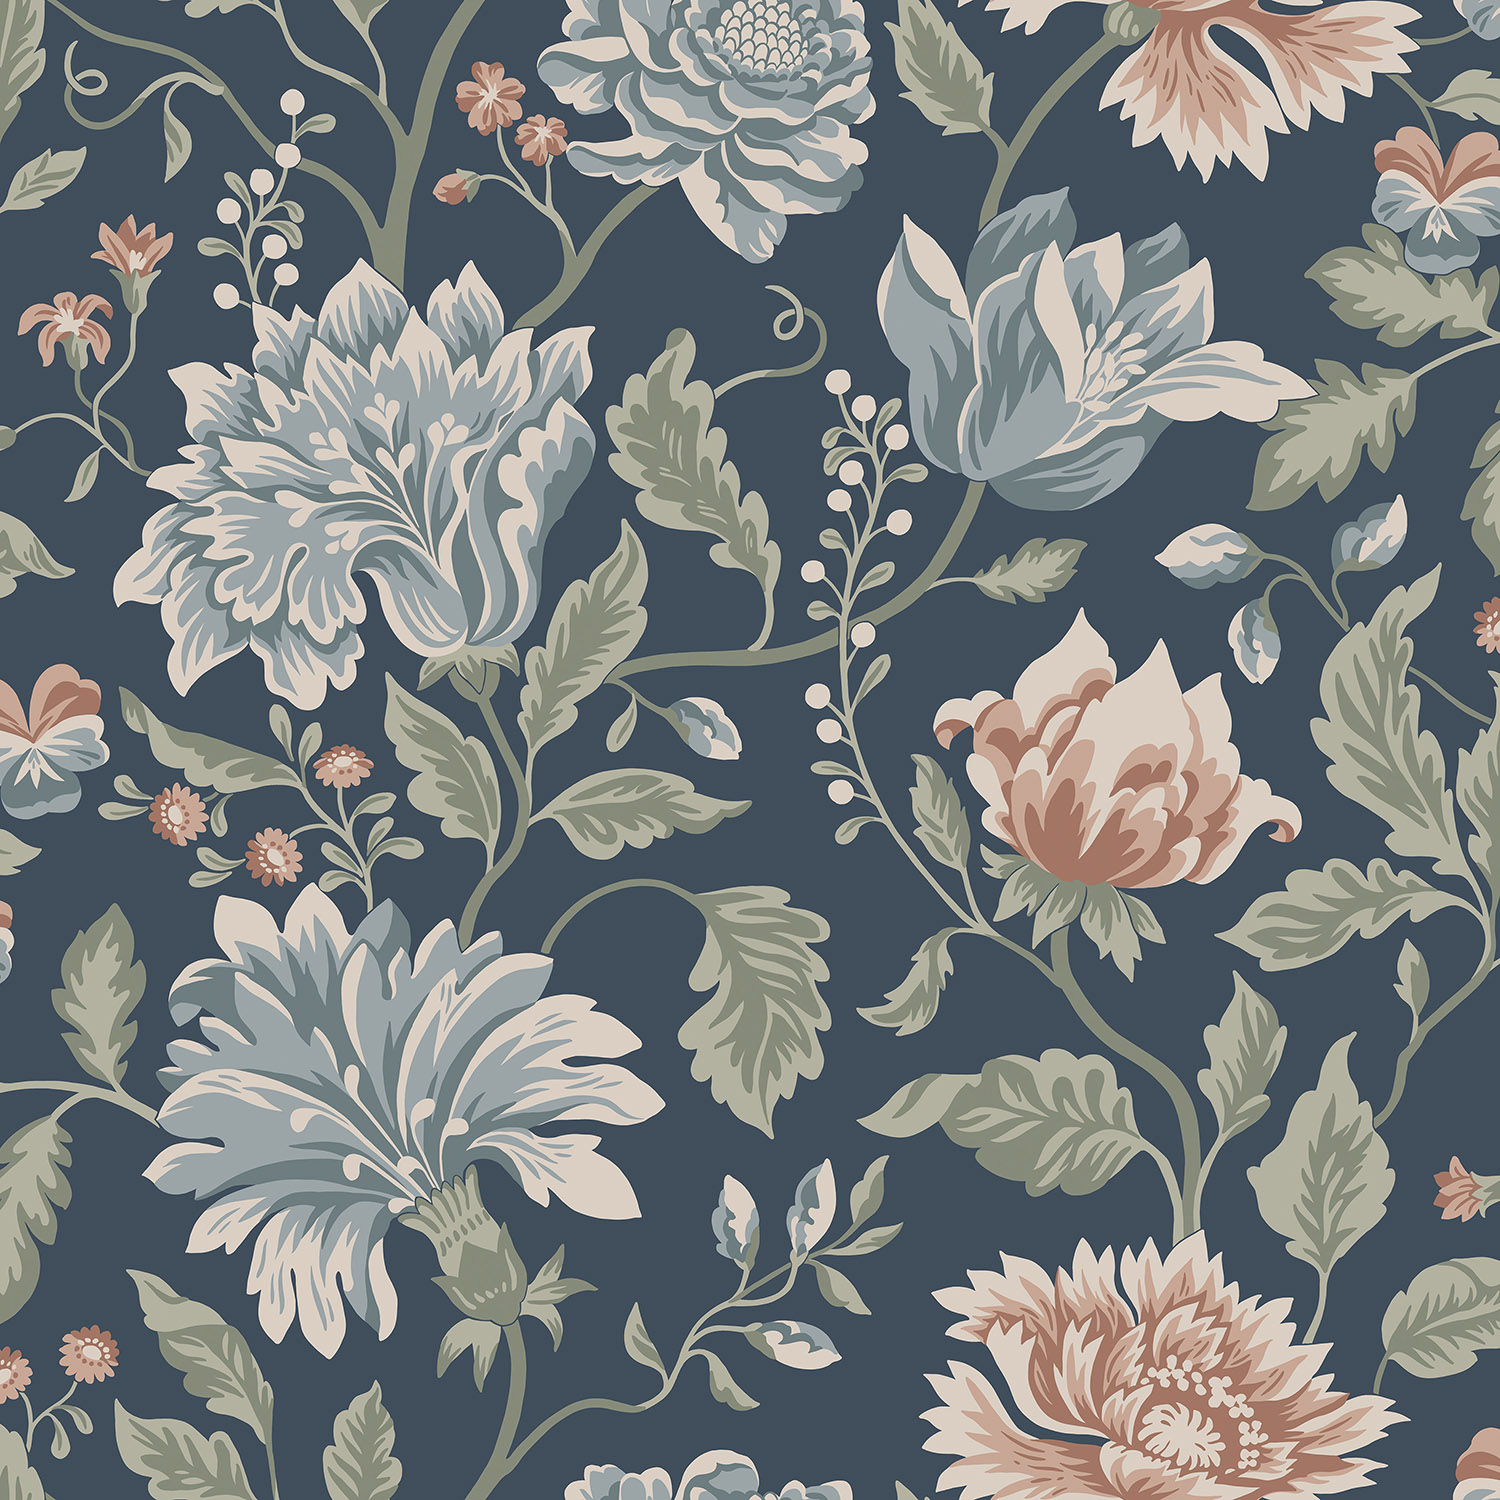 images/productimages/small/s10263-annabelle-classic-blue-sandberg-wallpaper-product.jpg